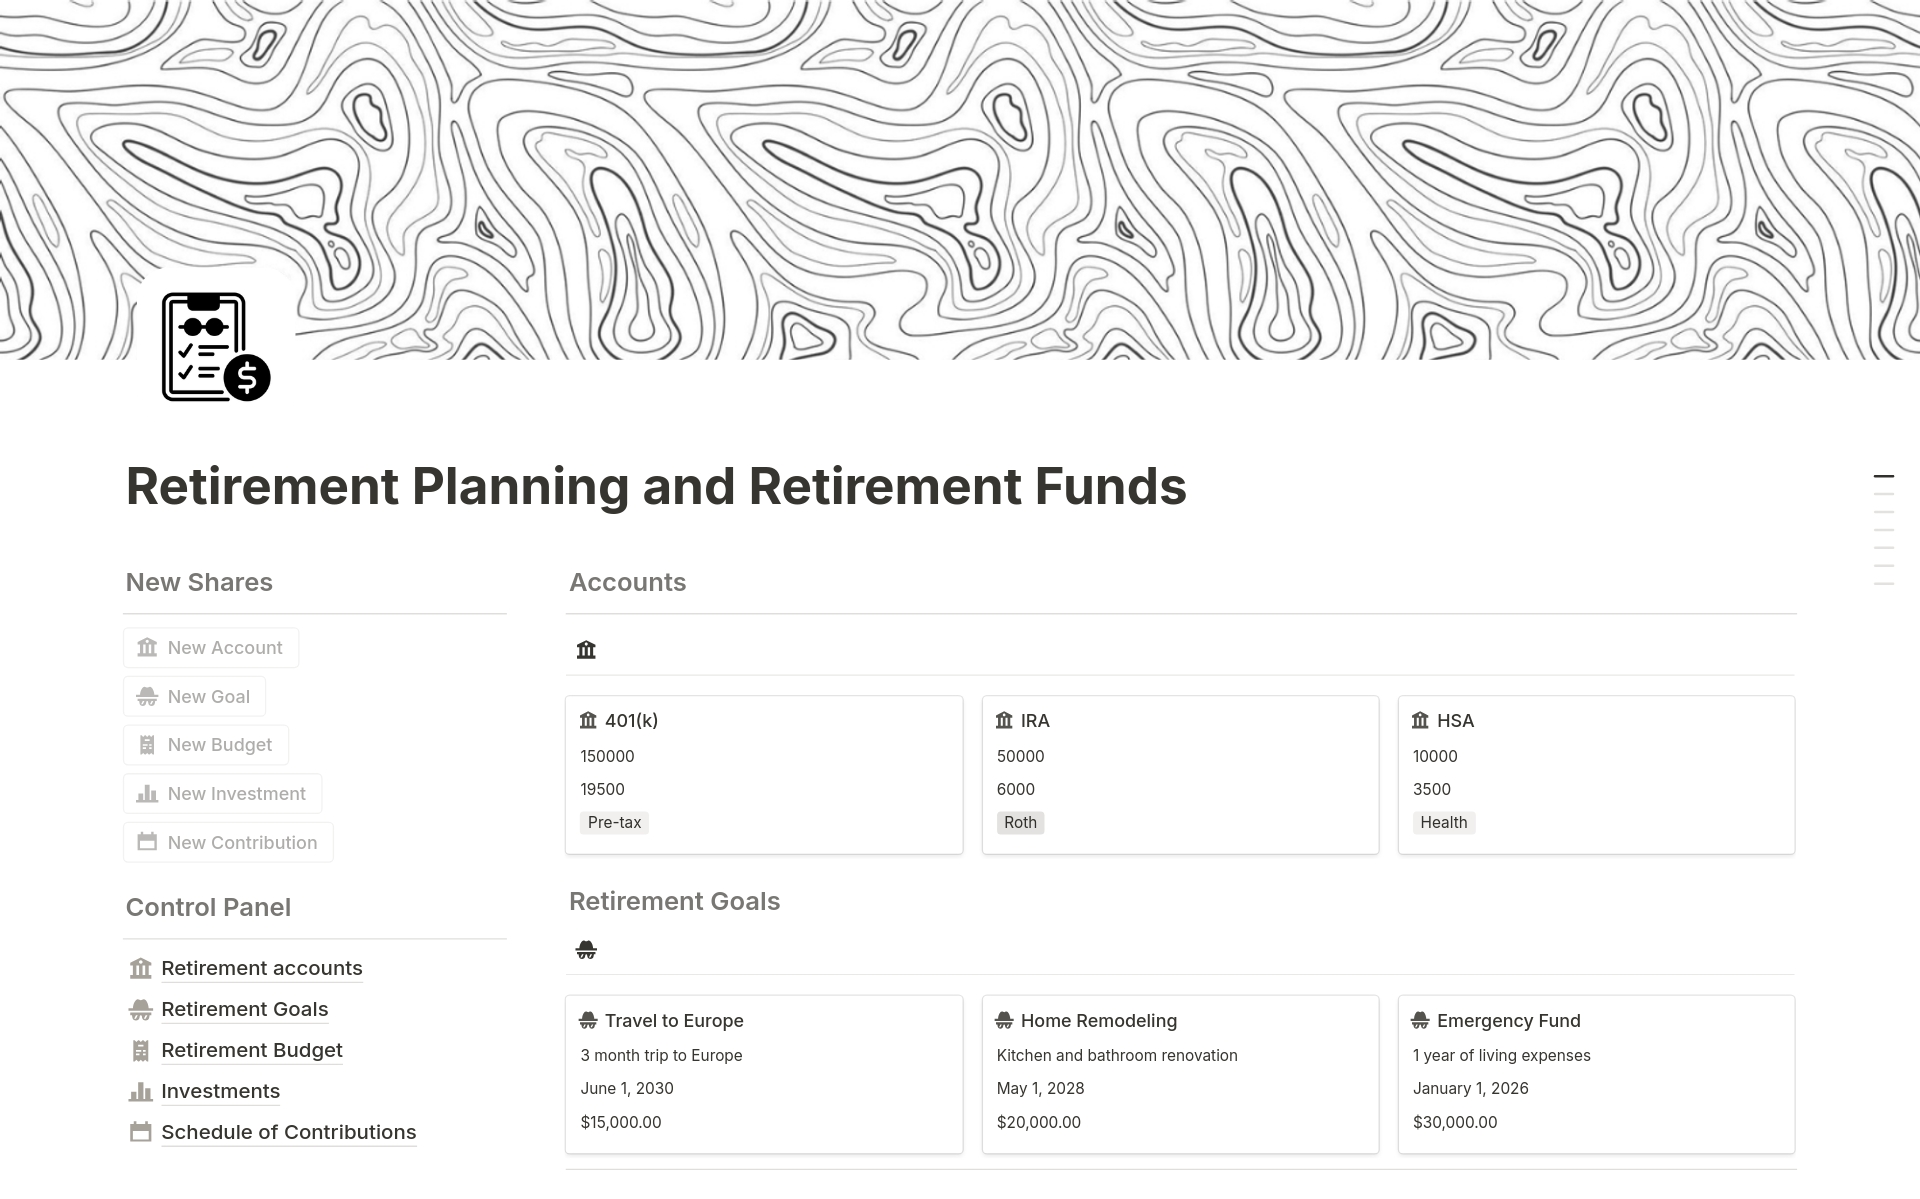 Plan your future with the Retirement Planning and Retirement Funds template in Notion. Ensure a peaceful and worry-free retirement.